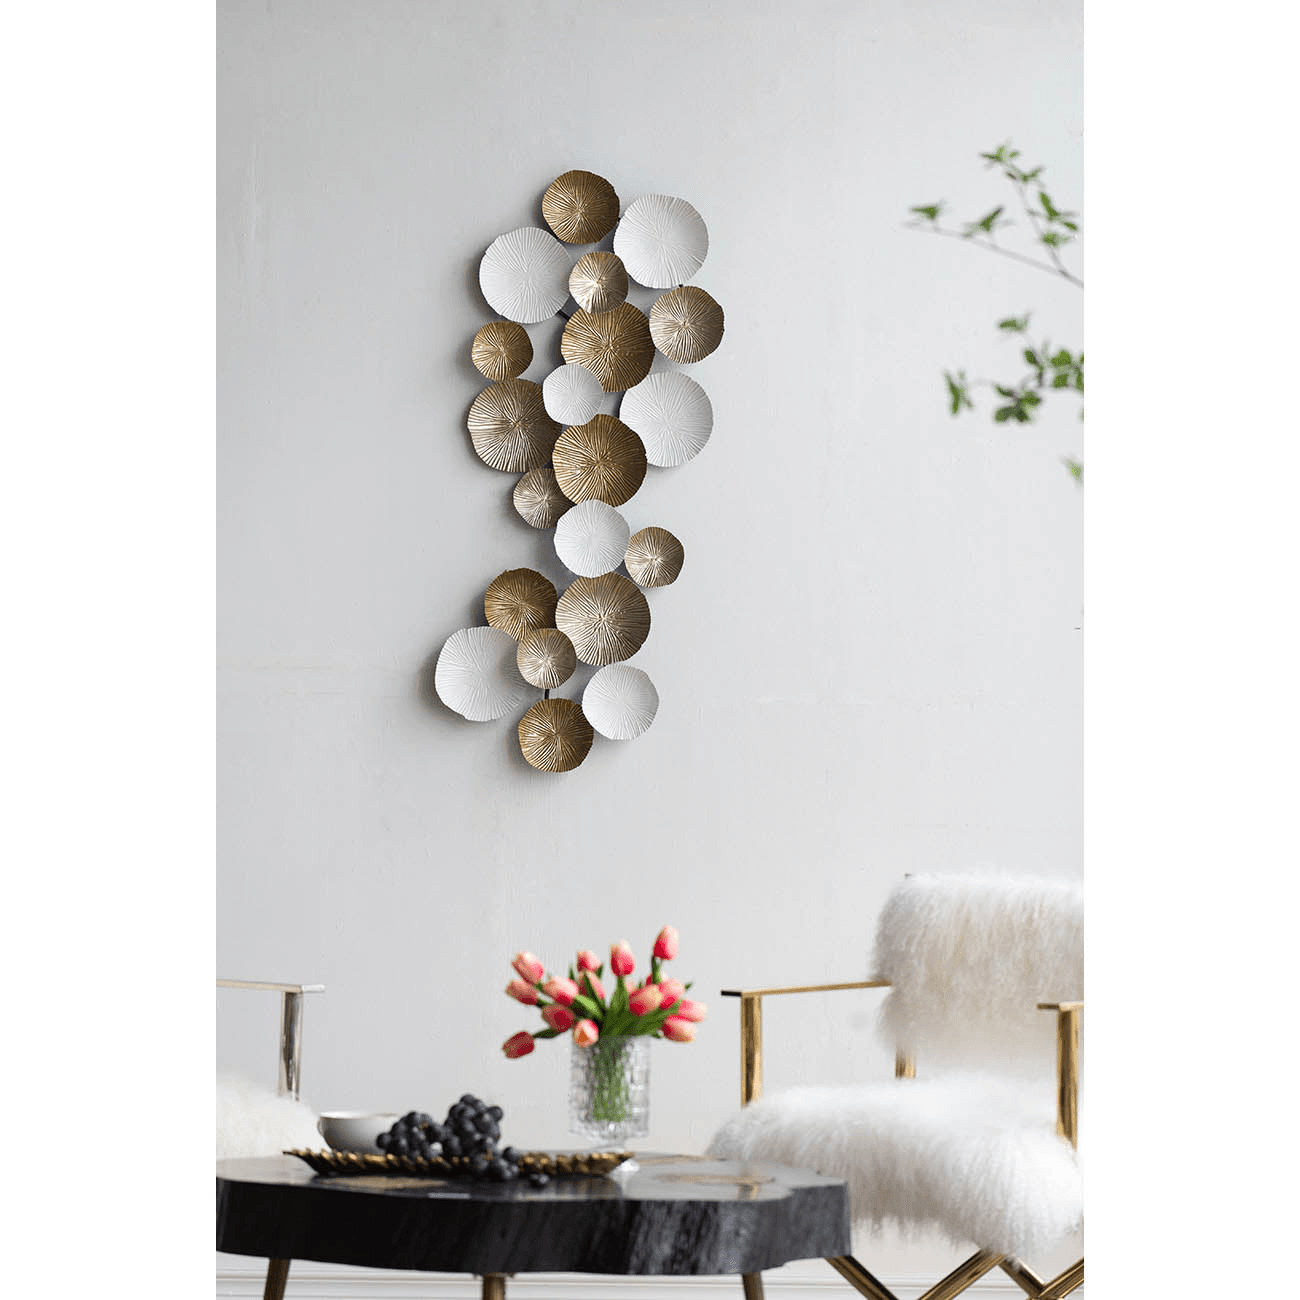 39.5" x 18" Metal Contemporary Wall Decor Accent, Large Hanging Sculpture for Bedroom Entryway Living Room - Loomini